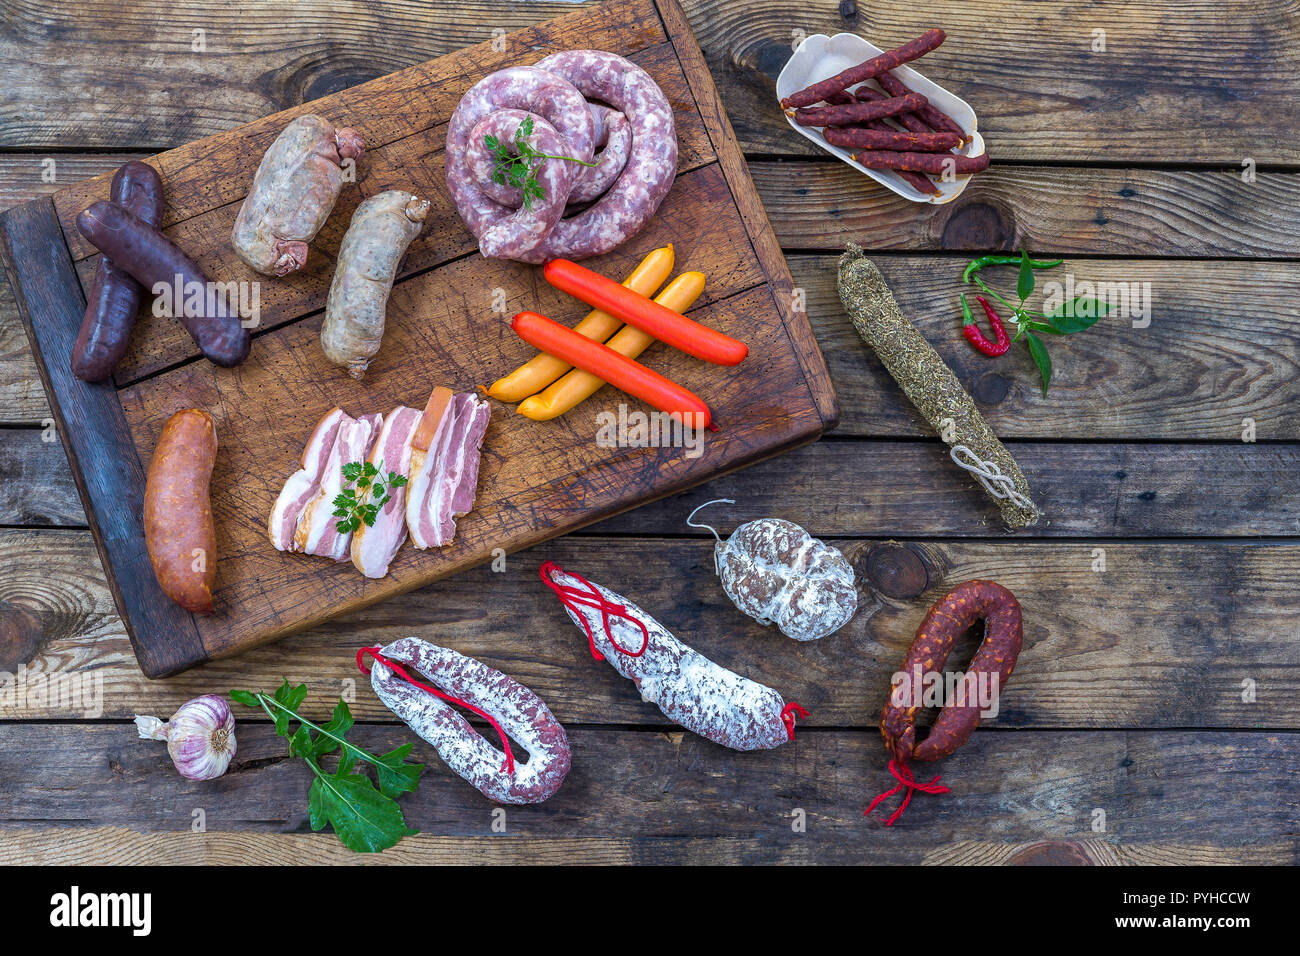 Selection of French Raw charcuterie board, with arugula leaves and dry sausage over a wooden background Stock Photo